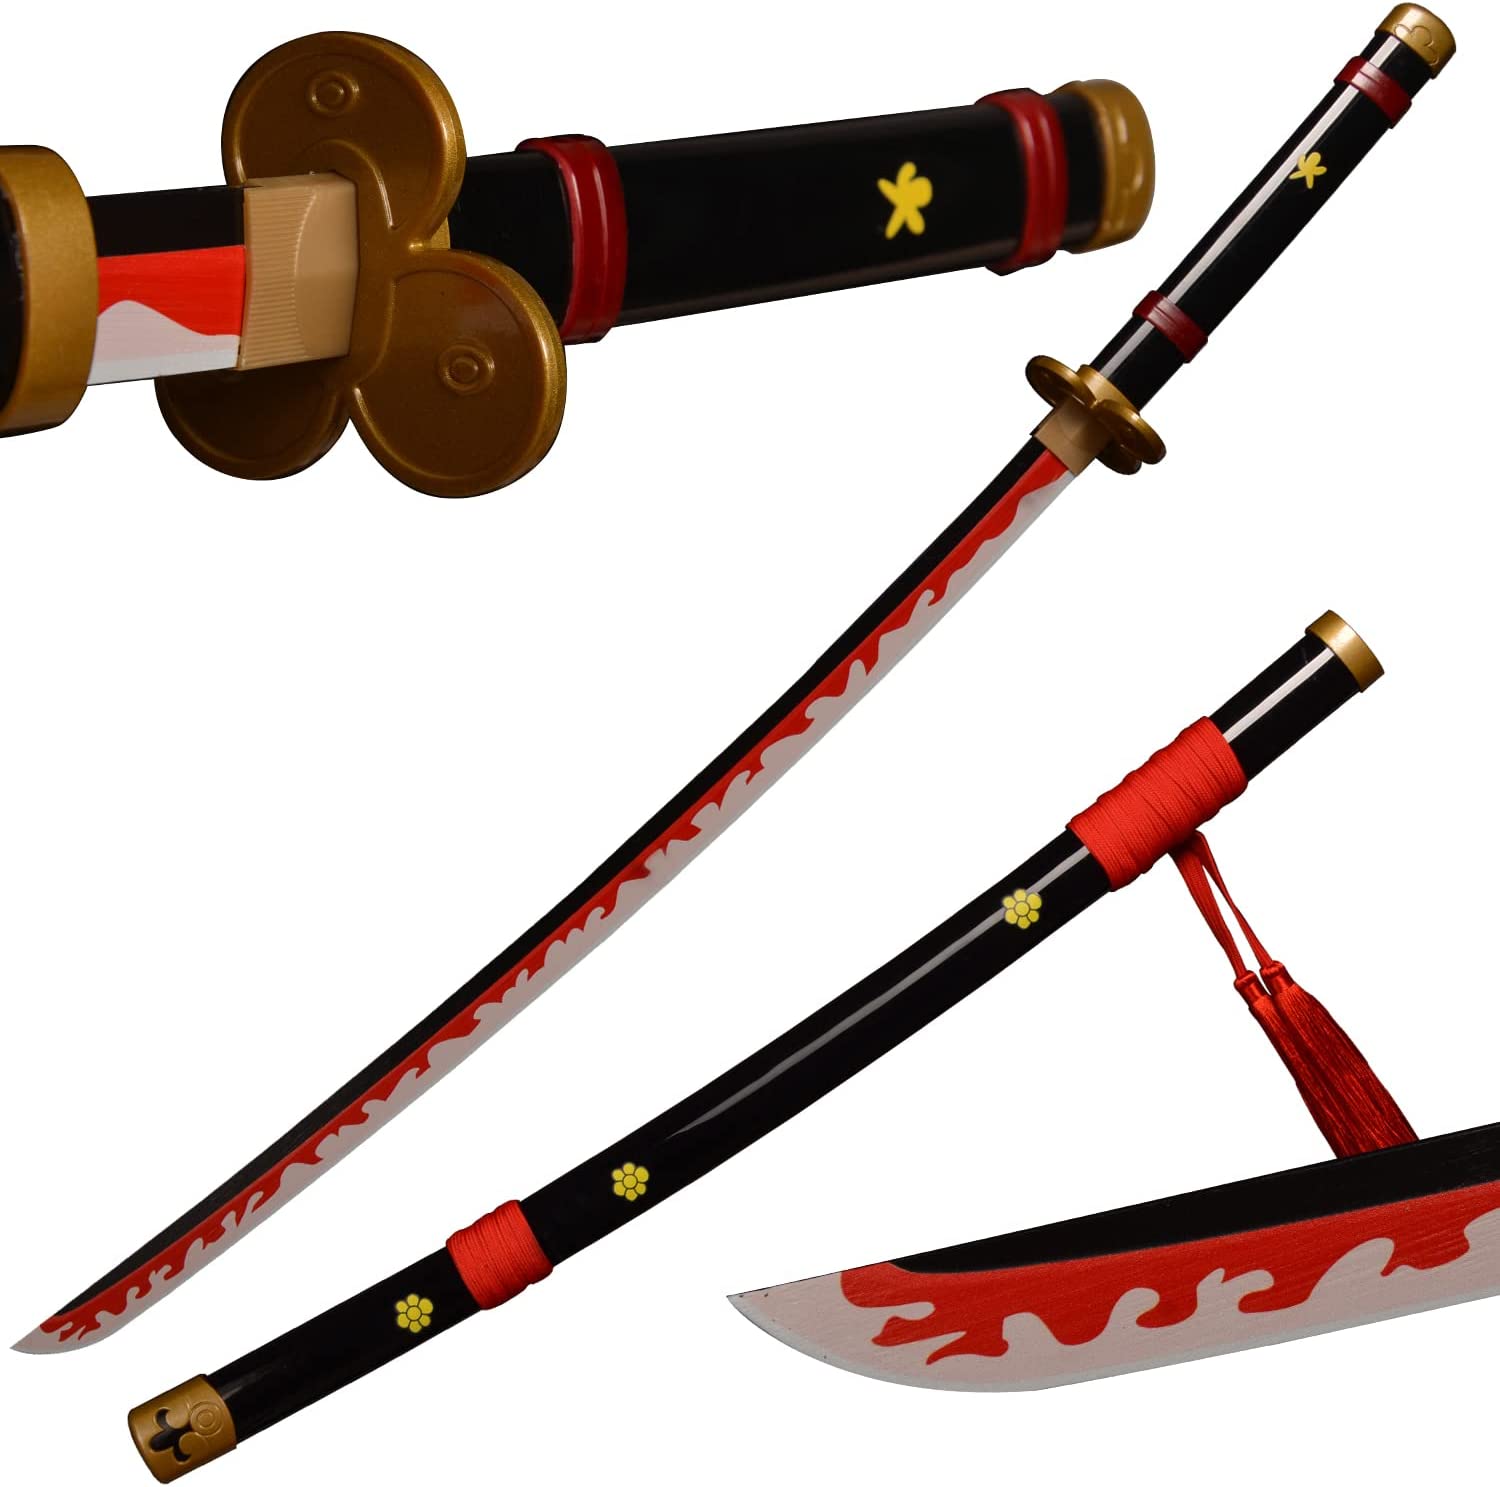 Black Ame No Habakiri Enma Sword of Roronoa Zoro in $88 (Japanese Steel is  also Available) from One Piece Swords| Japanese Samurai Sword | Type IV